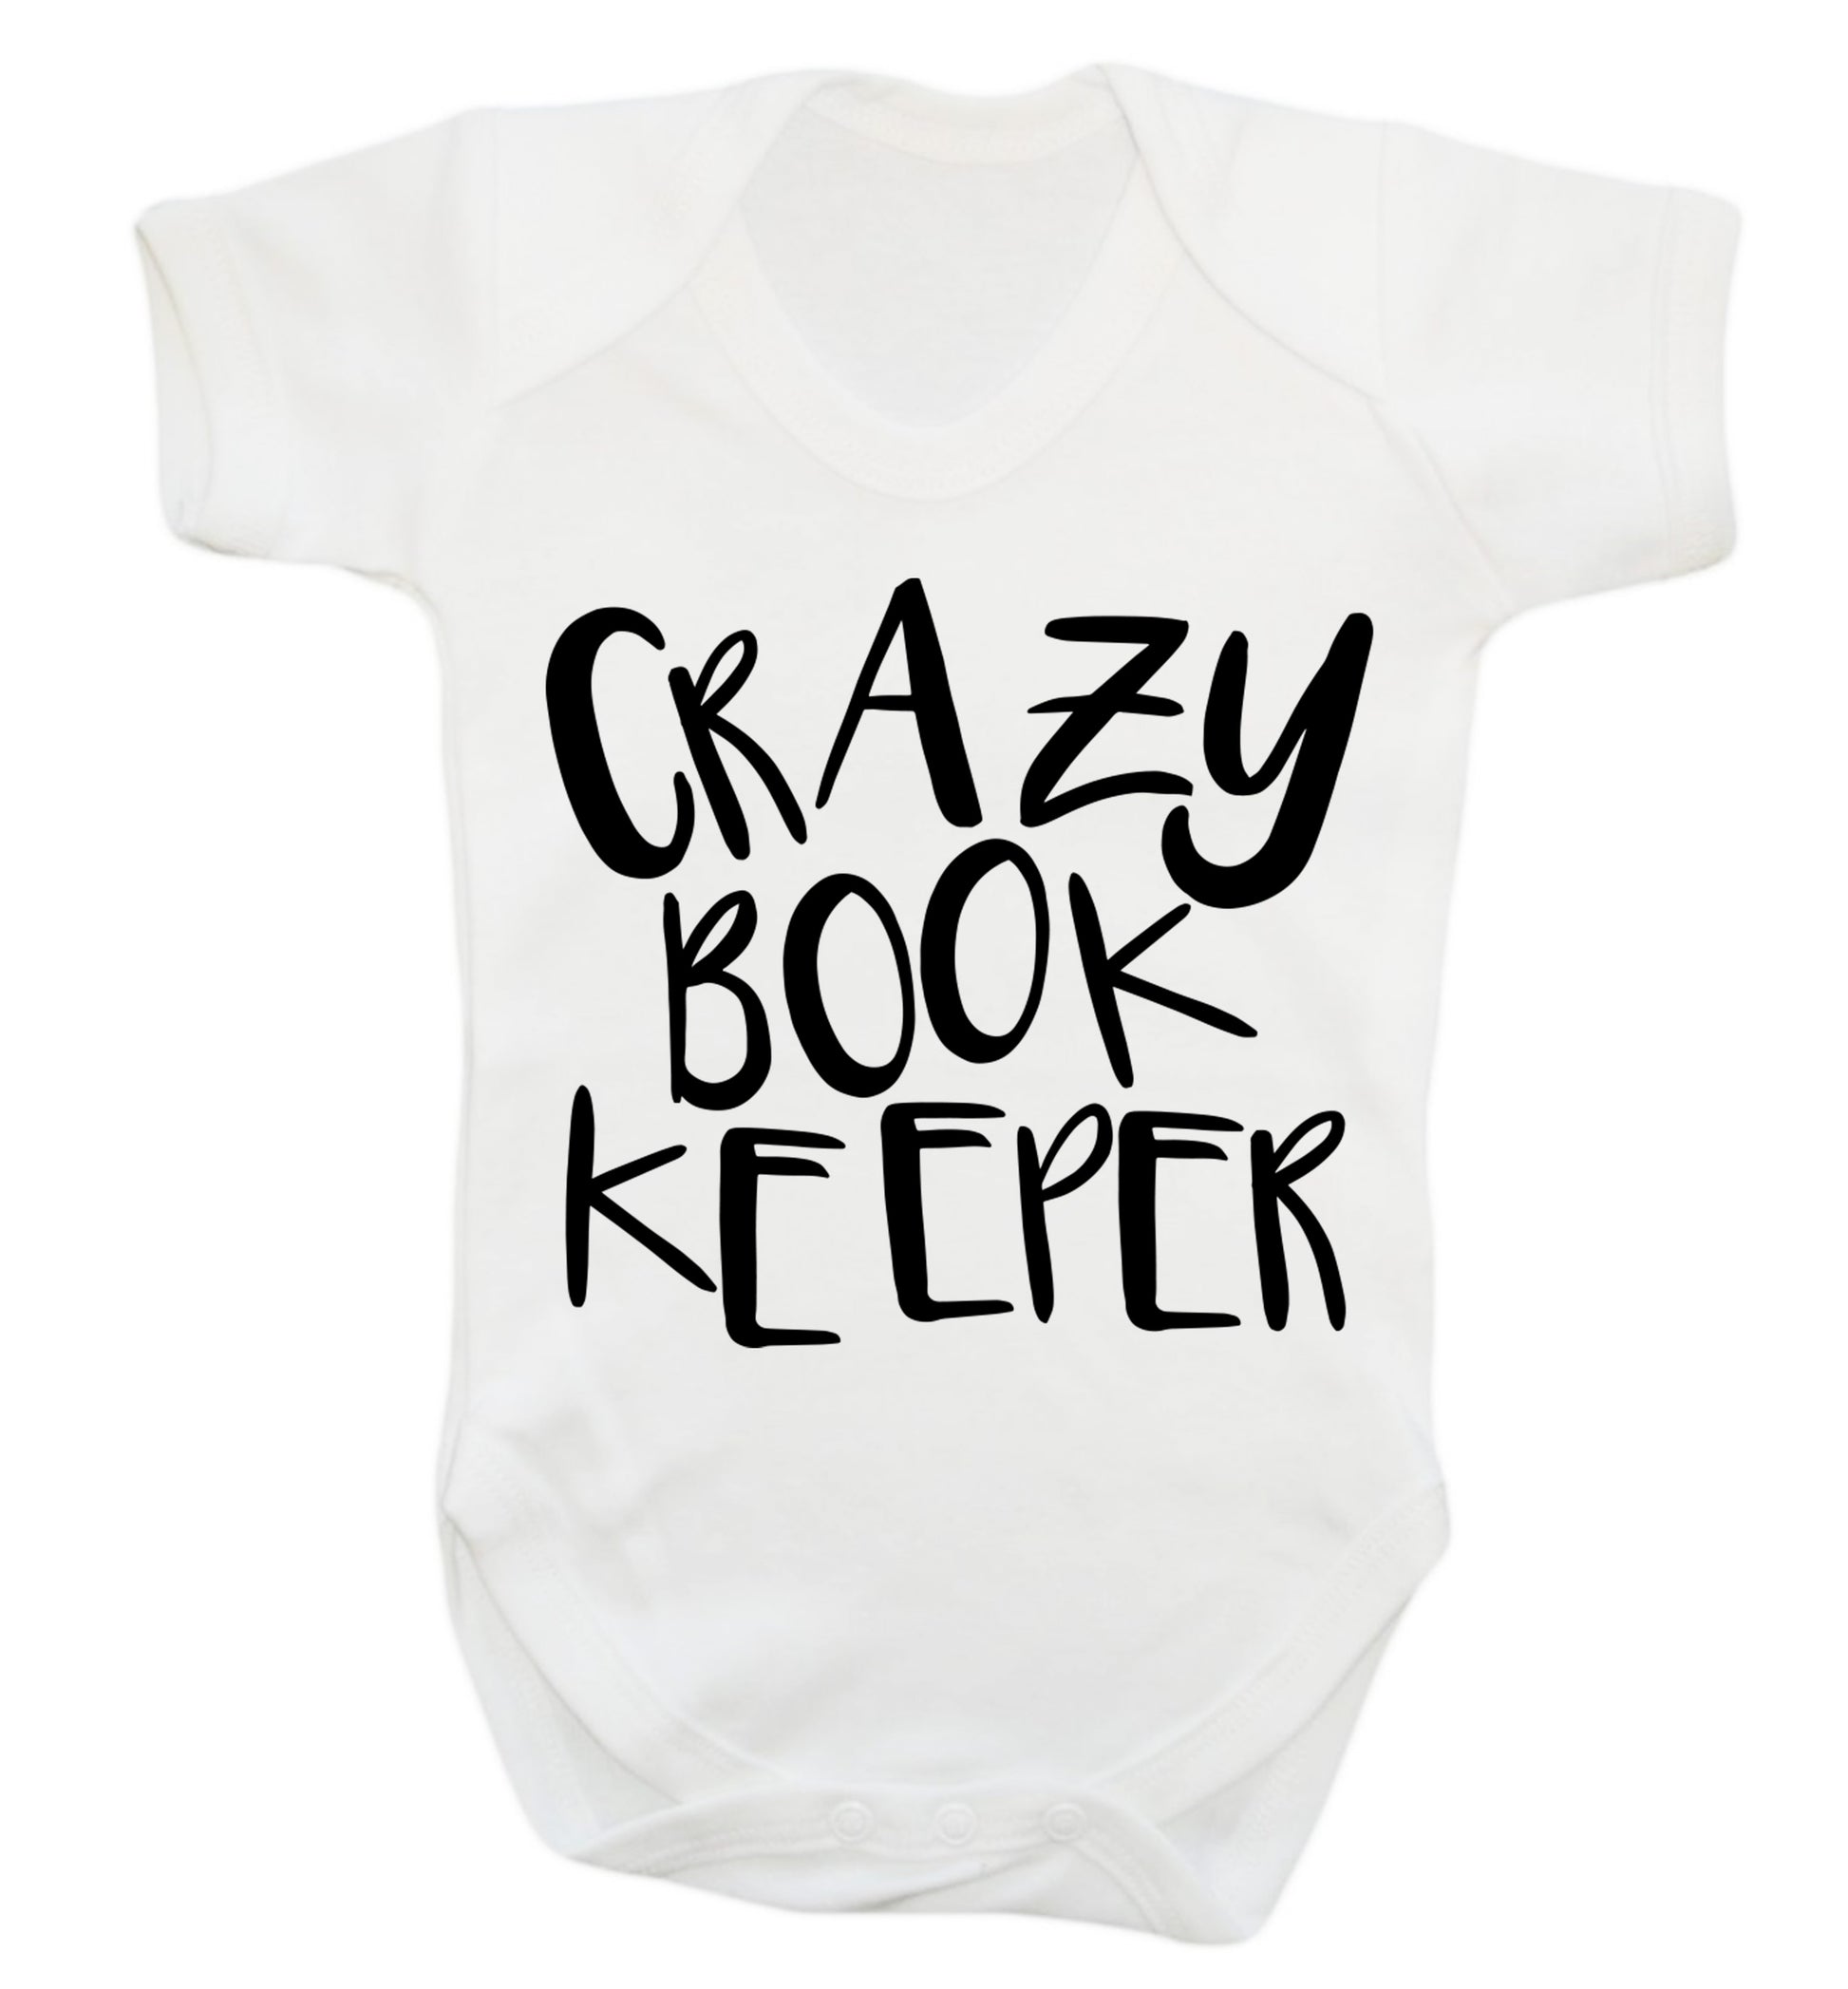 Crazy bookkeeper Baby Vest white 18-24 months